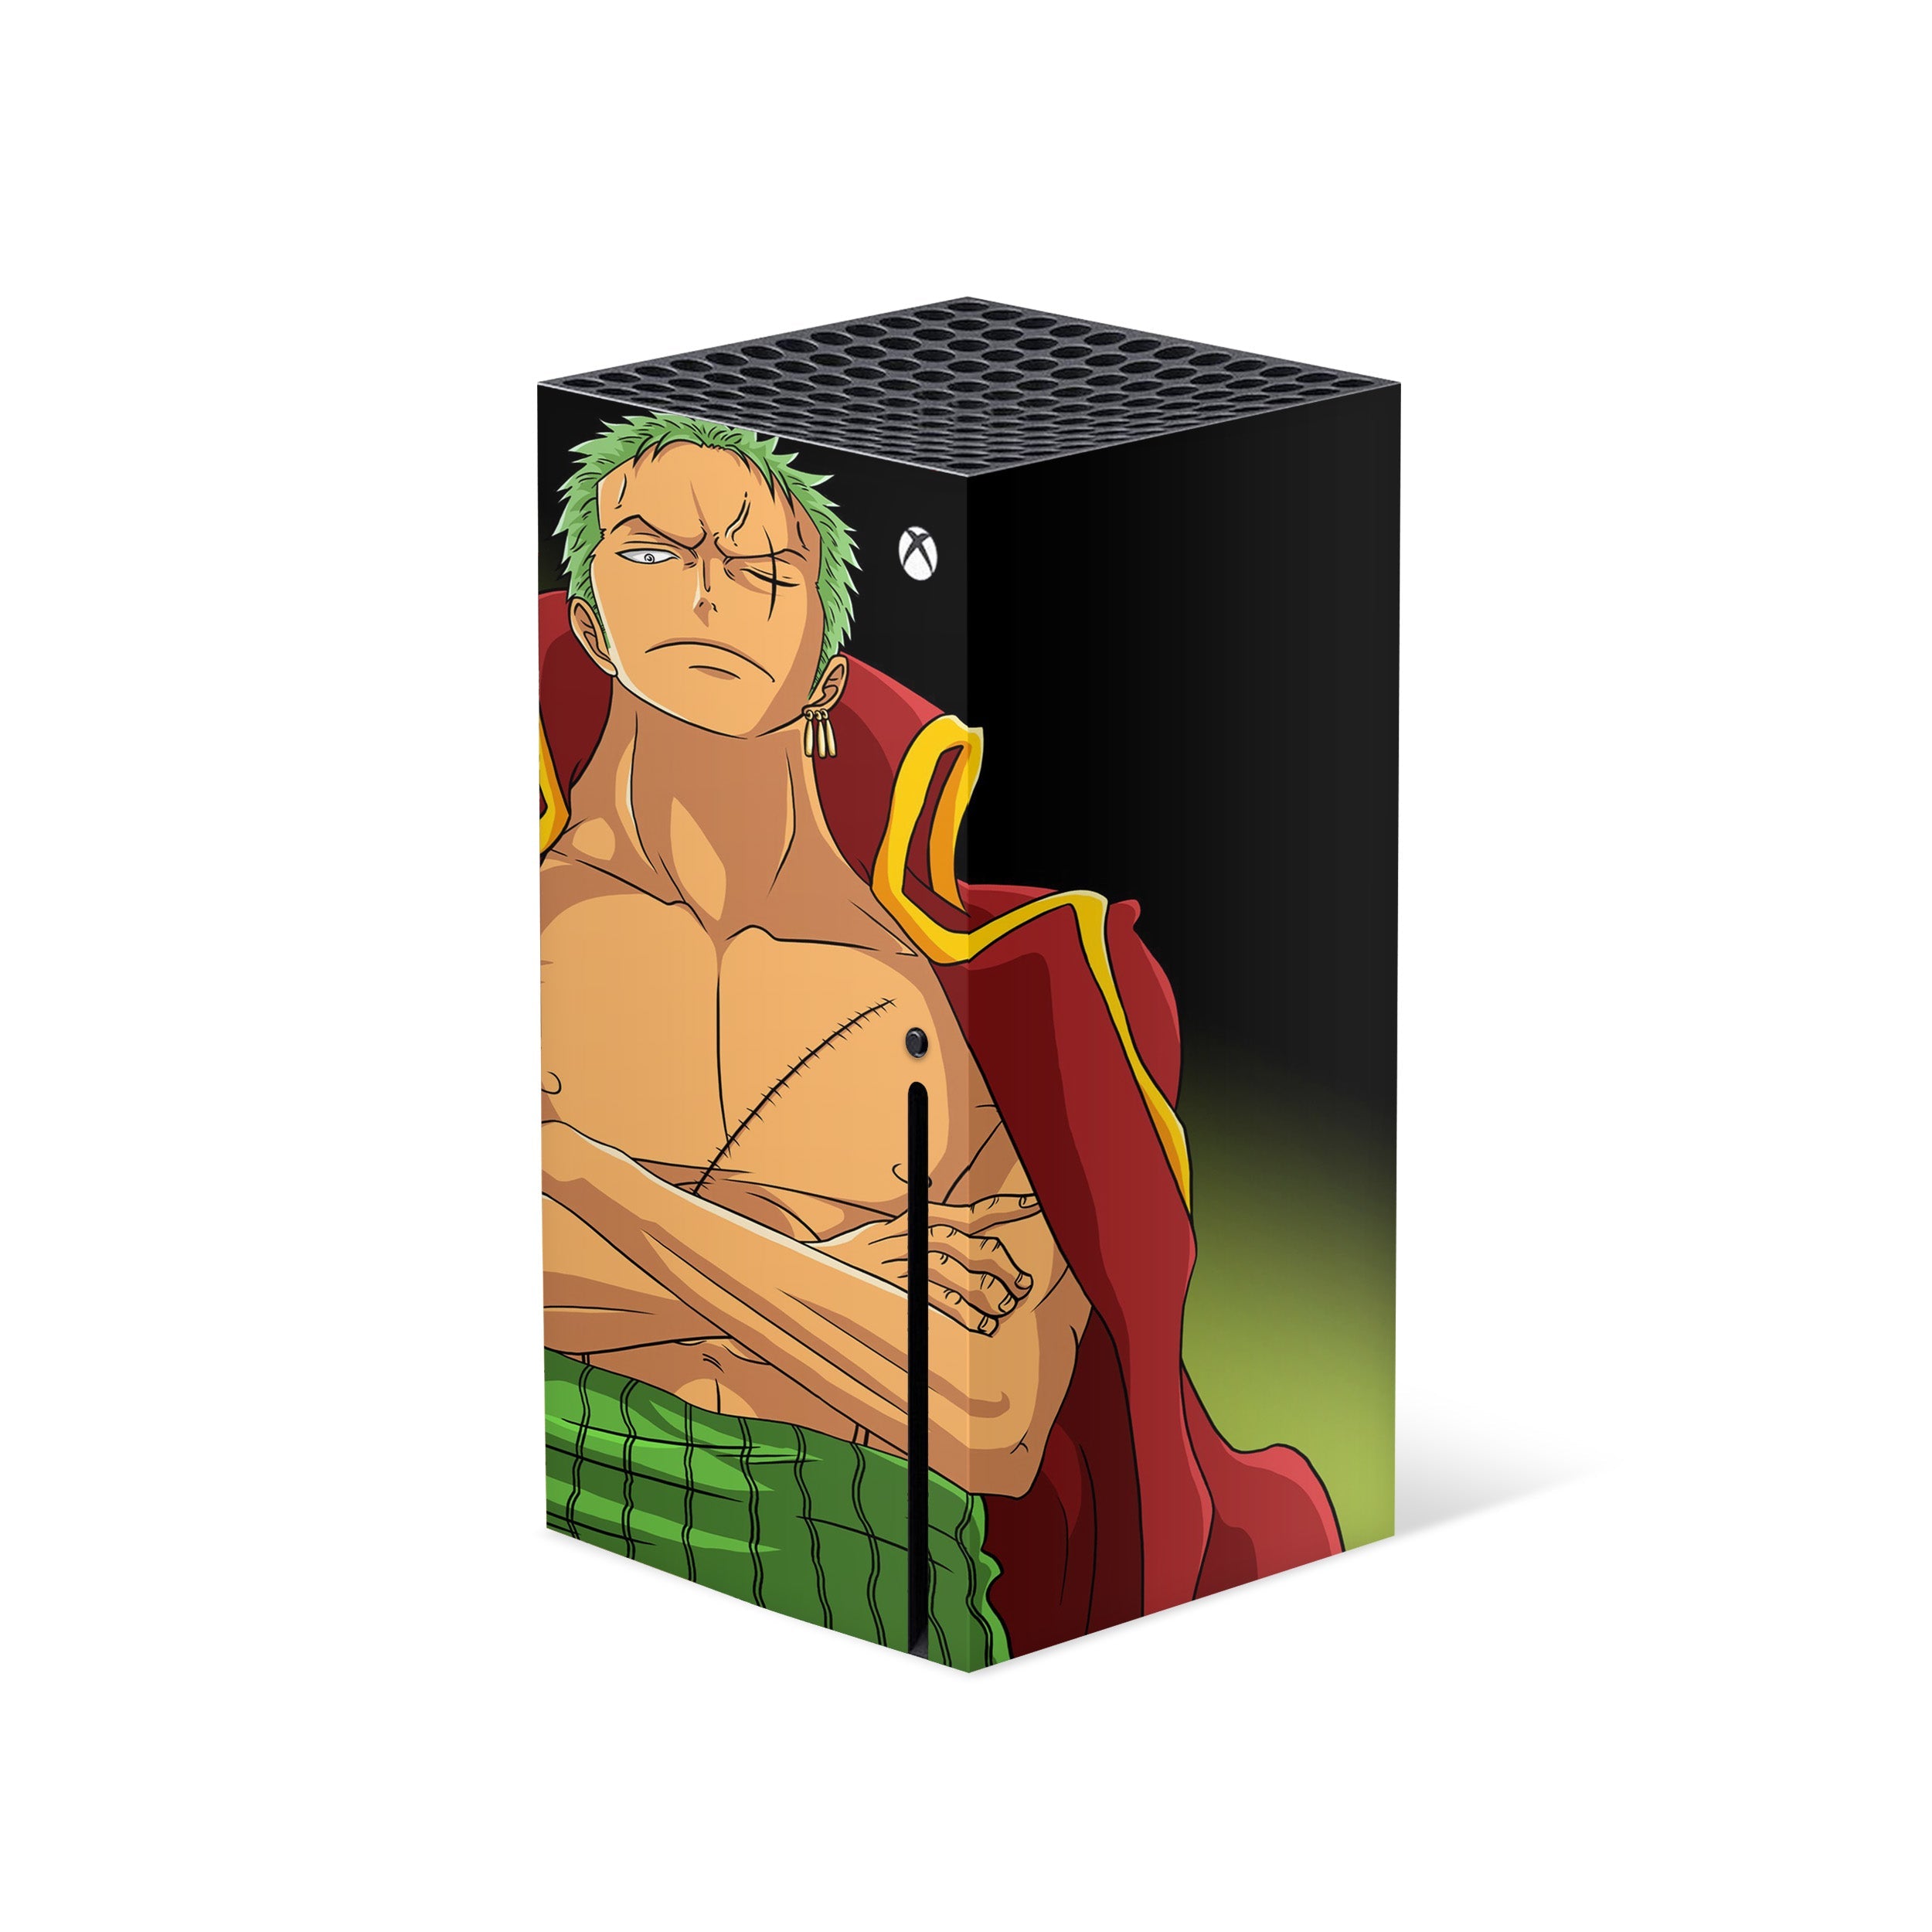 A video game skin featuring a One Piece Zoro Roronoa design for the Xbox Series X.